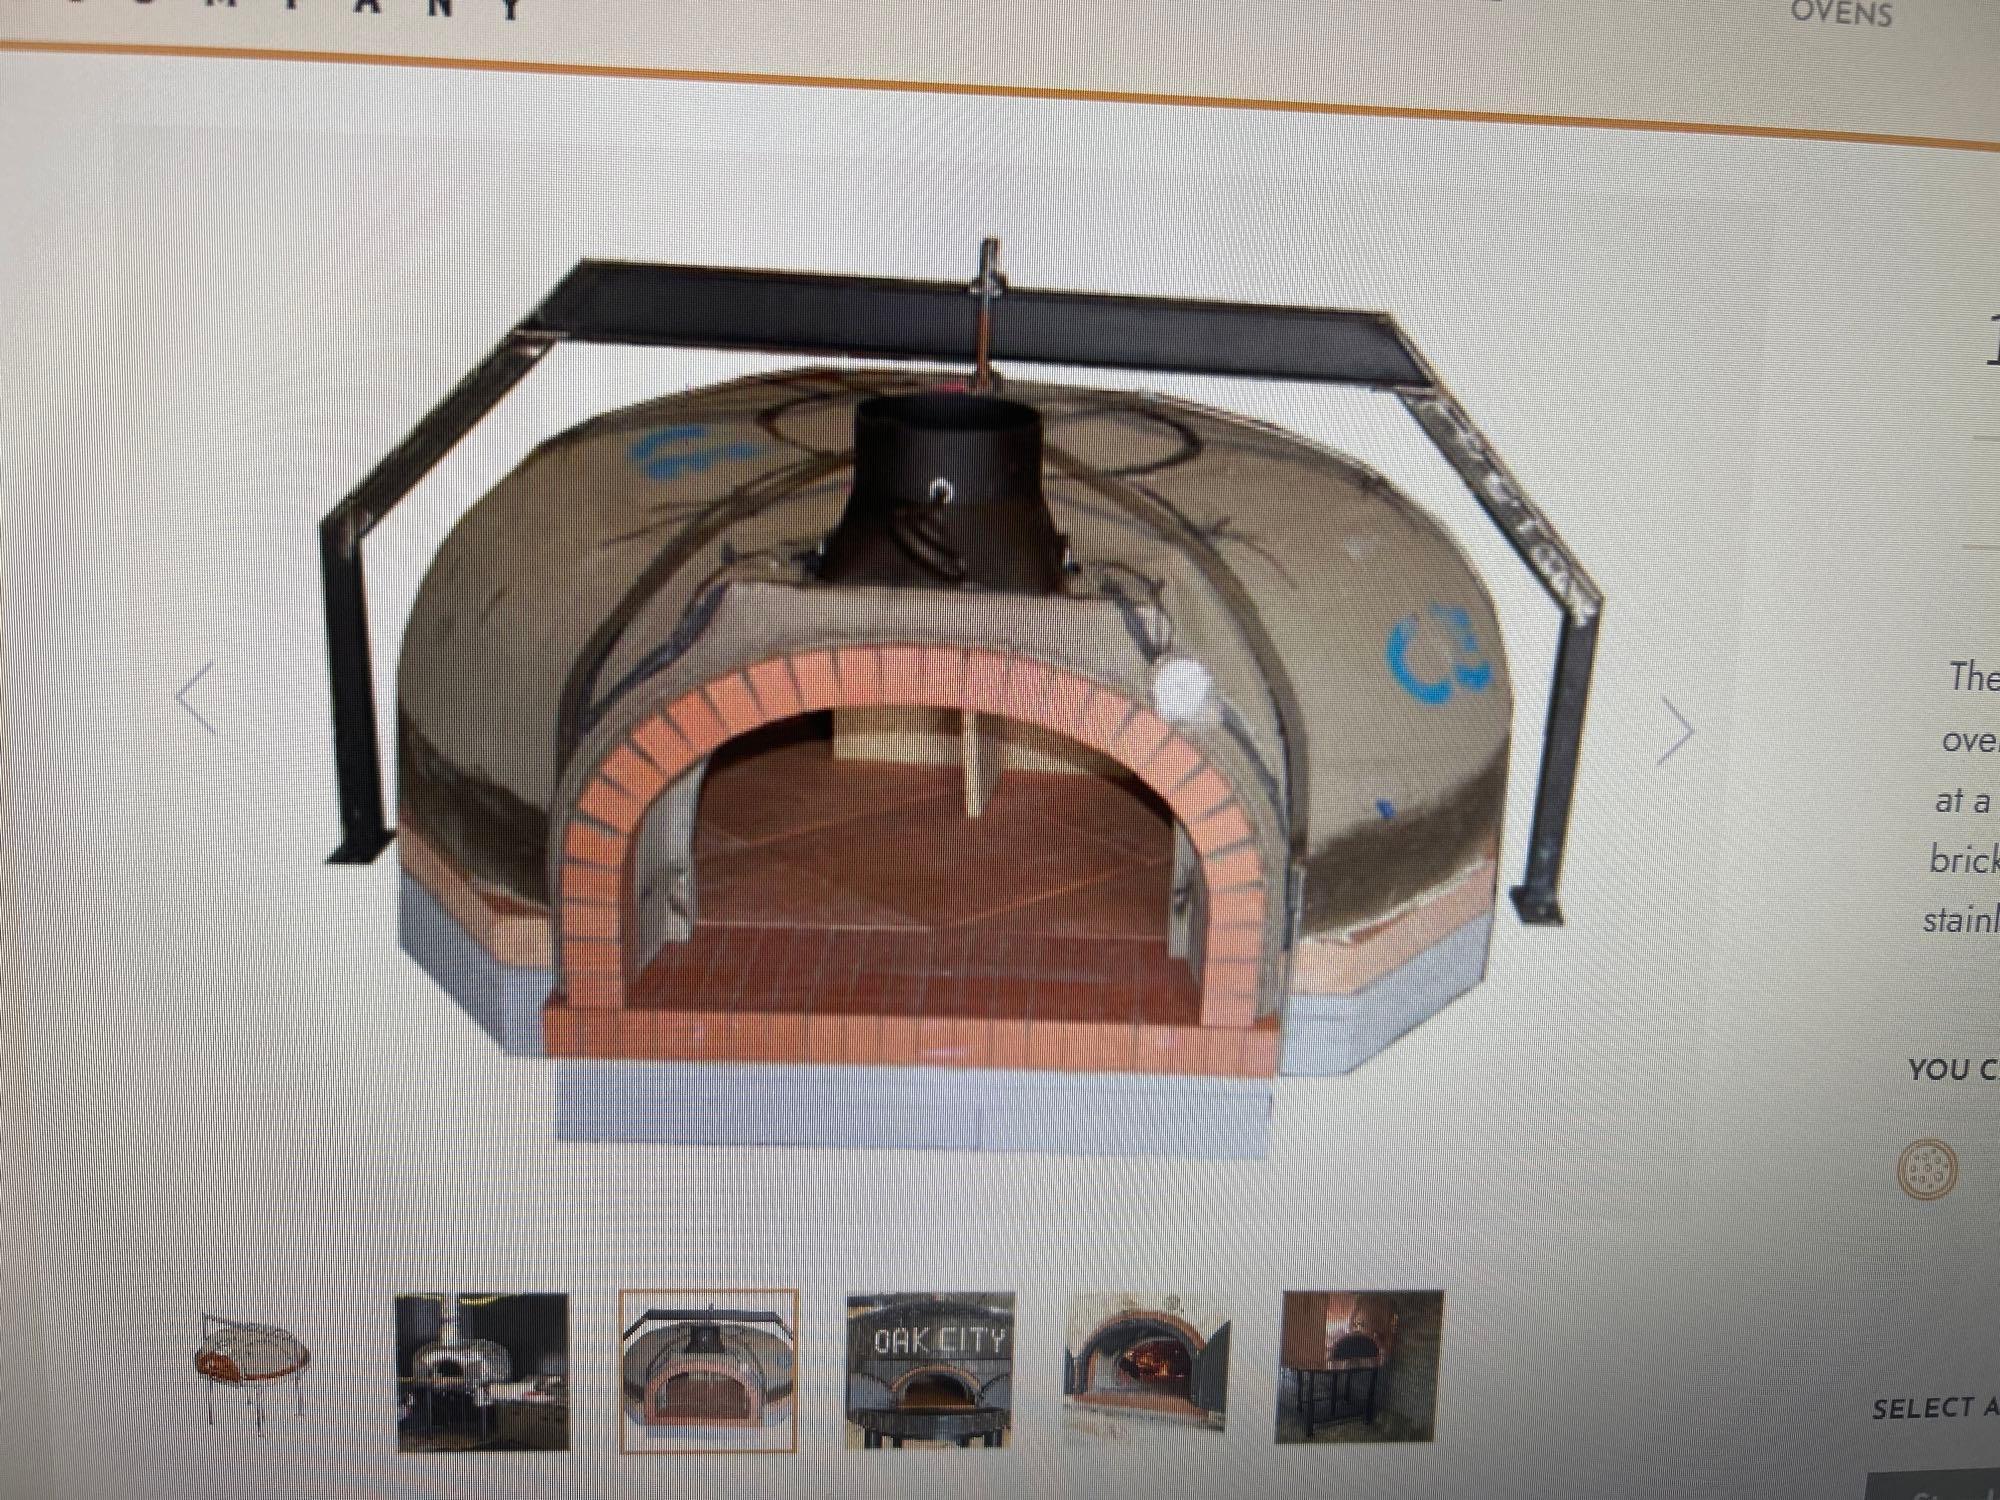 New Bread Stone Ovens Mdl. 1400 B Kit Wood and Gas Fired Brick Oven